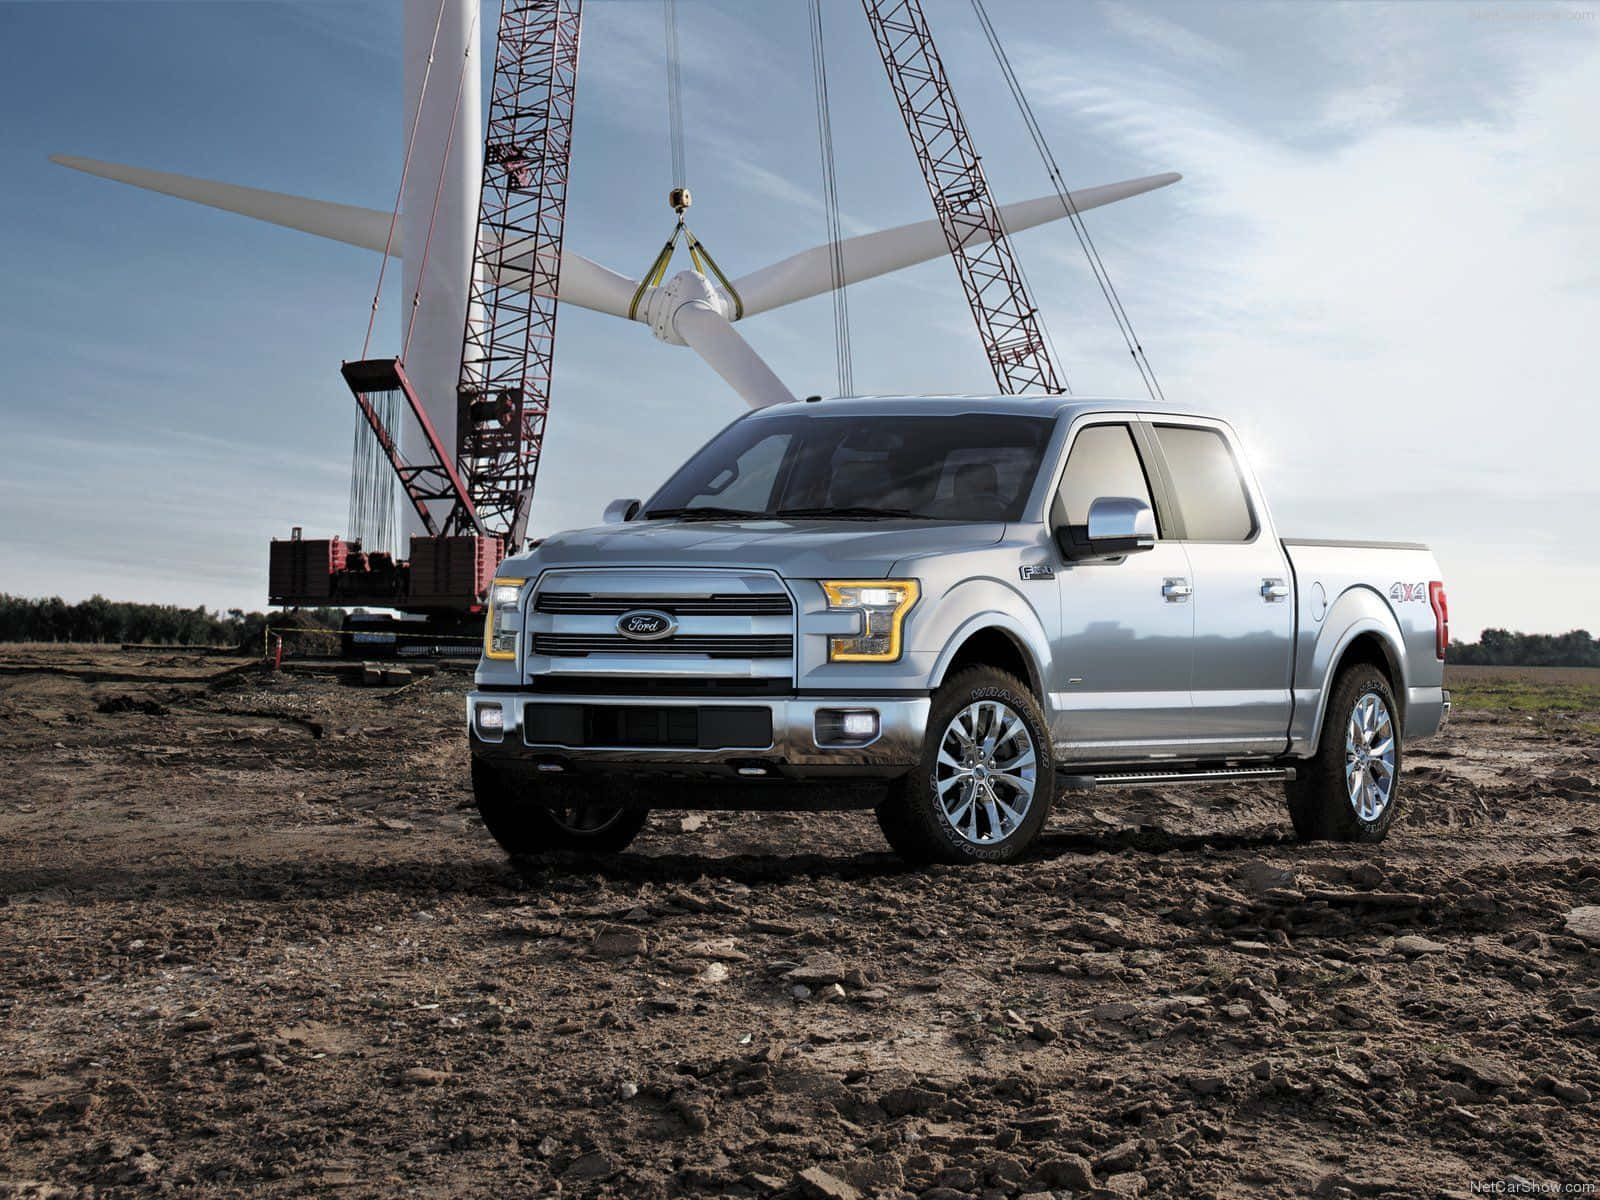 The Ford F - 150 Is Parked In Front Of A Wind Turbine